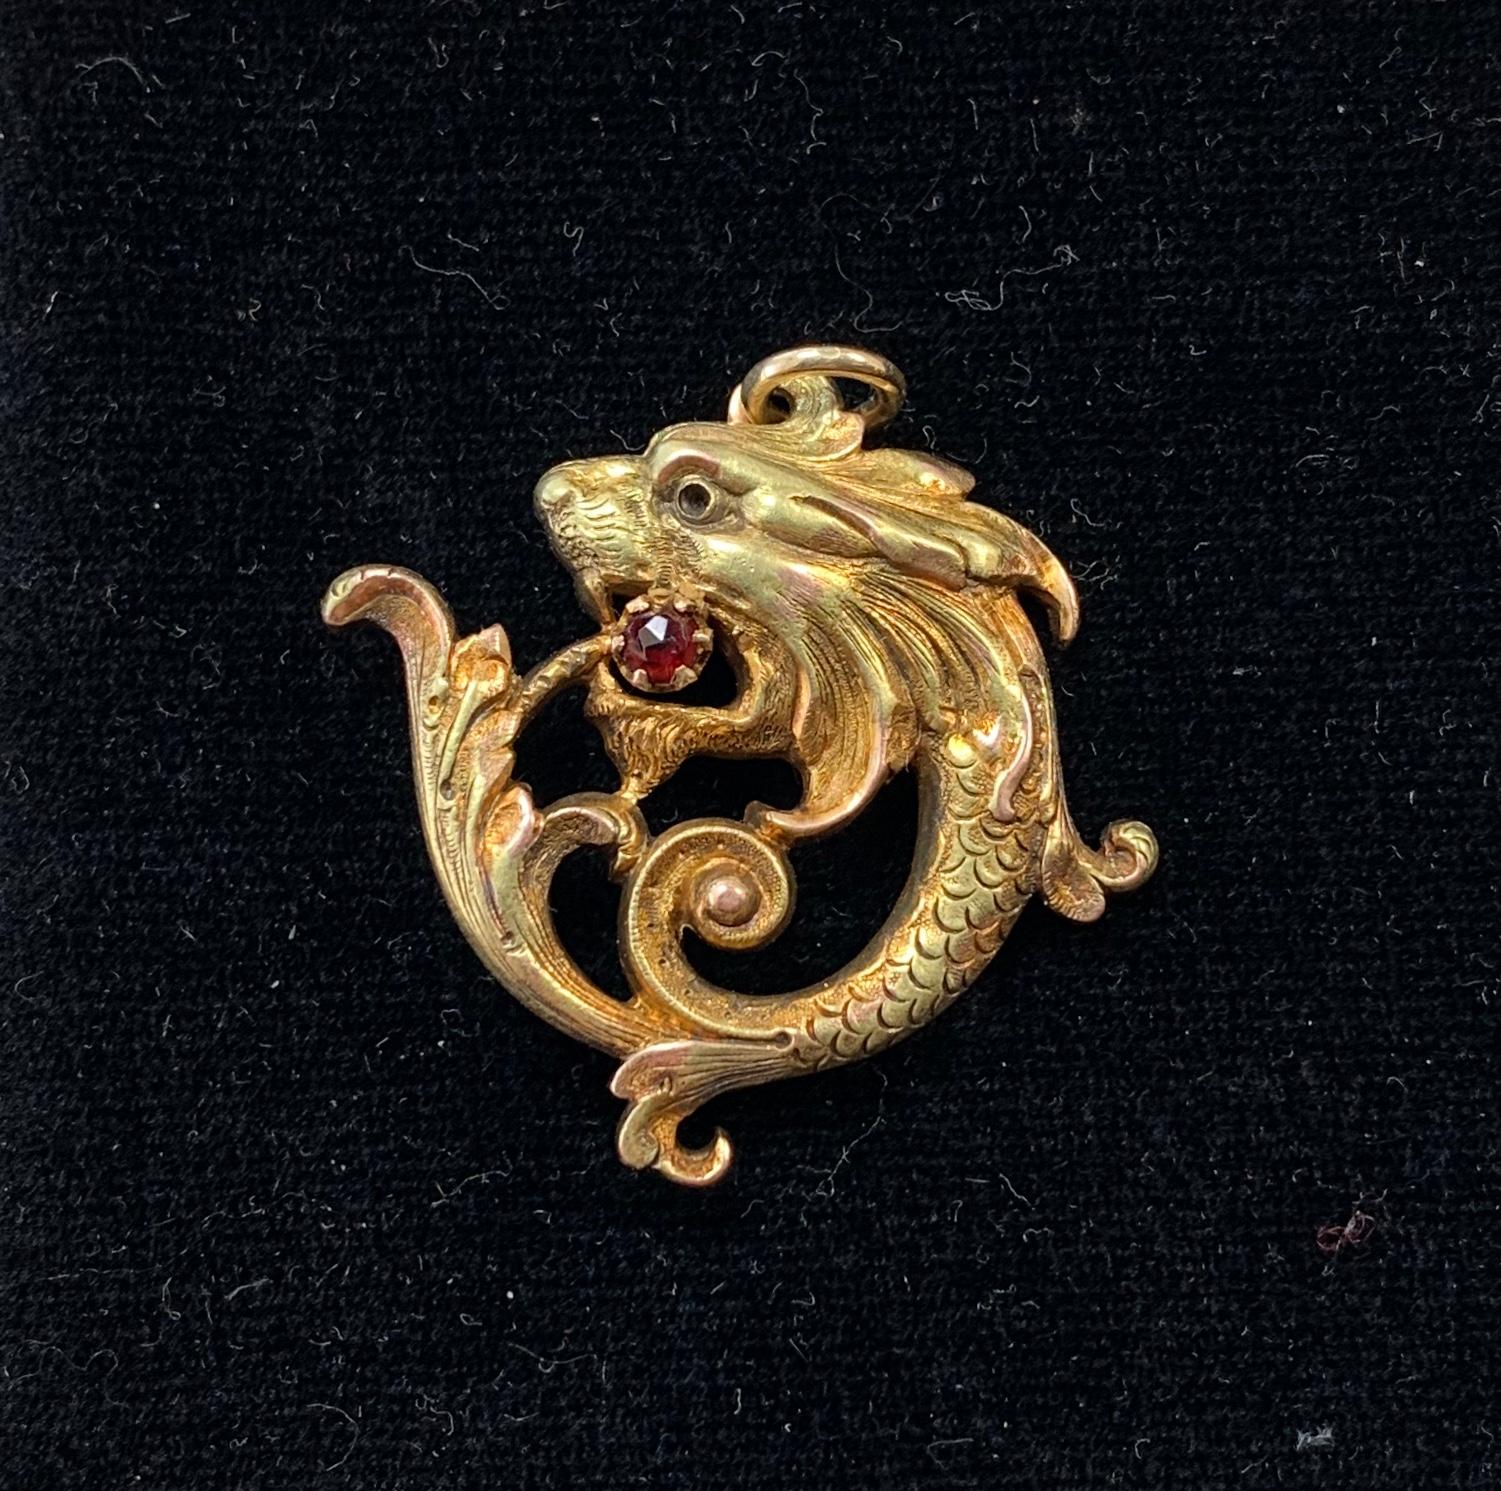 THIS IS A STUNNING BEAUX ARTS RENAISSANCE REVIVAL ART NOUVEAU 14 KARAT GOLD PENDANT OF A GRIFFIN OR DRAGON WITH A STUNNING ANTIQUE GARNET IN THE MOUTH.
This is a beautiful Beaux Arts - Art Nouveau - Belle Epoque pendant in the Renaissance Revival